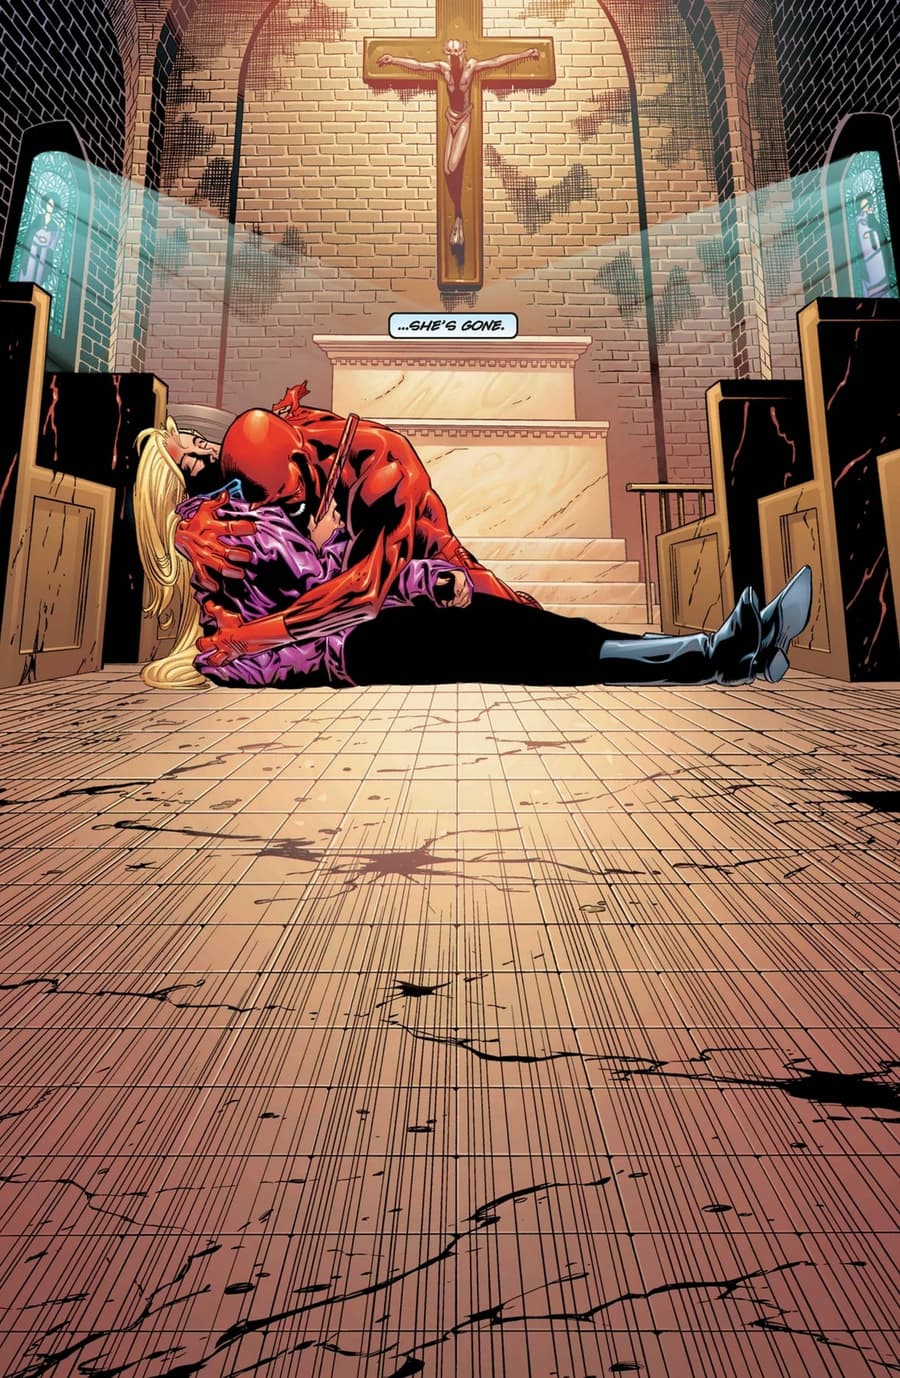 DAREDEVIL (1998) #5 page by Kevin Smith and Joe Quesada